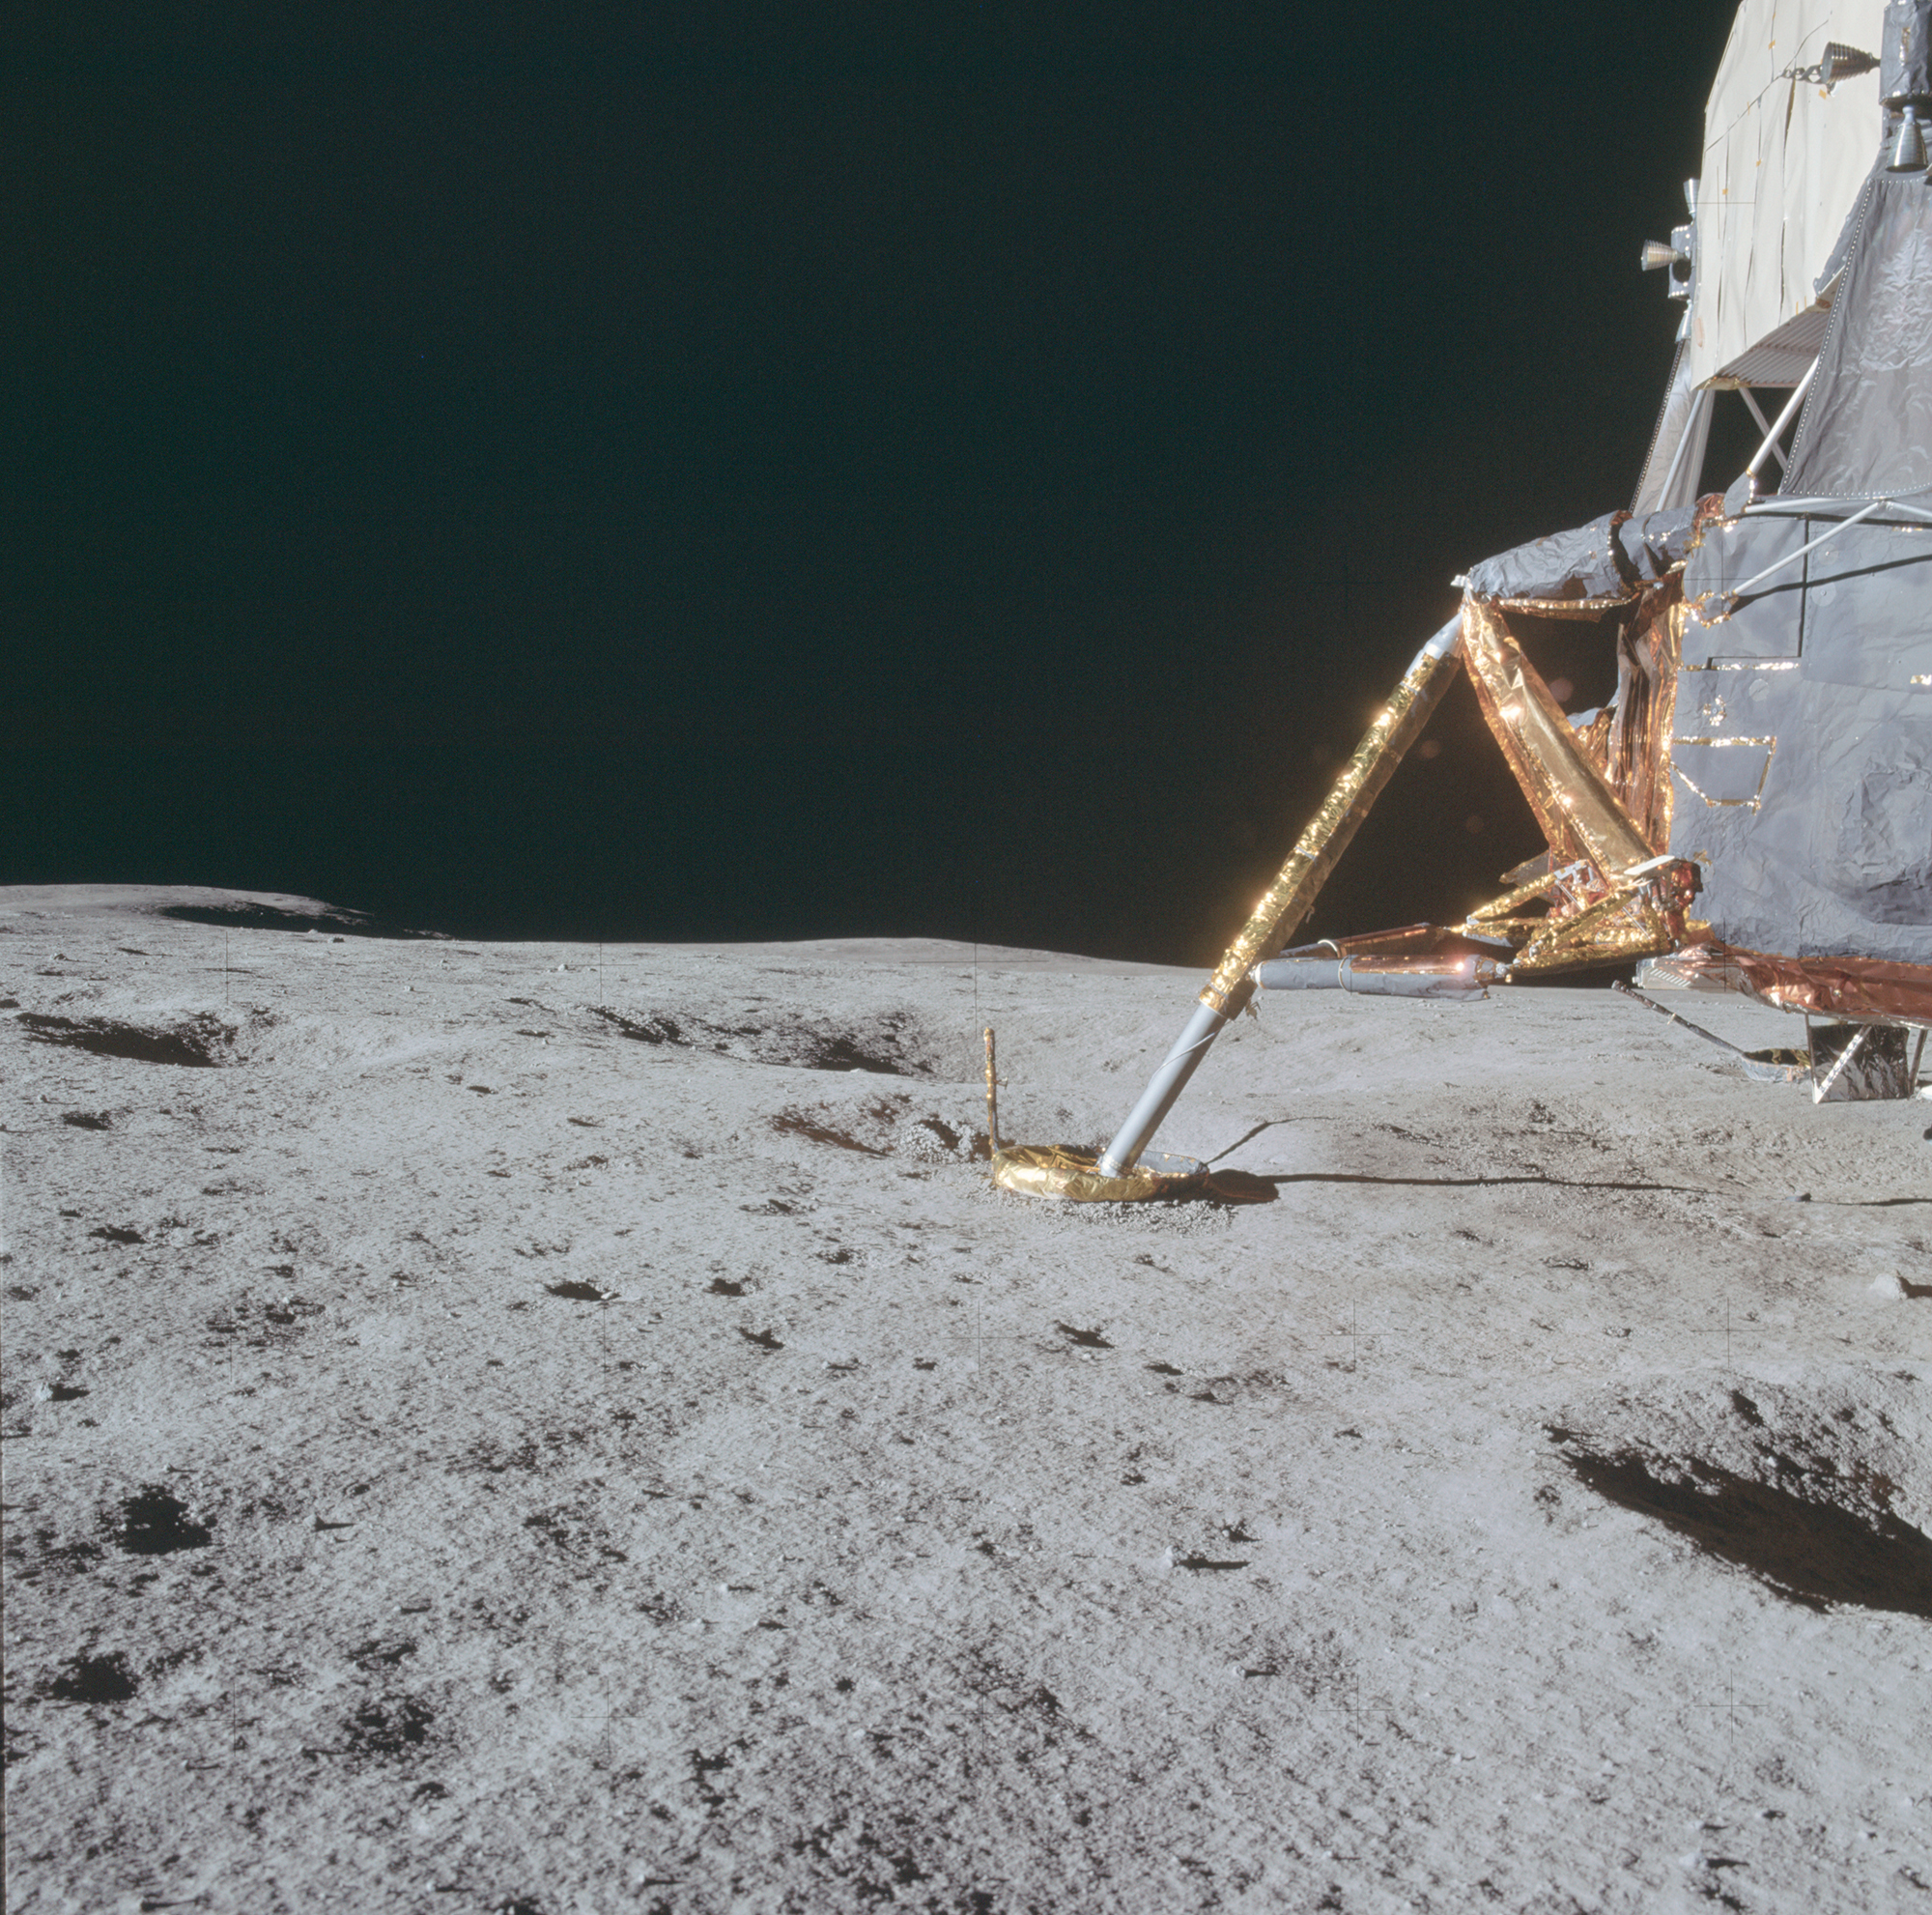 apollo-14-showing-the-northeast-of-the-lunar-module.jpg